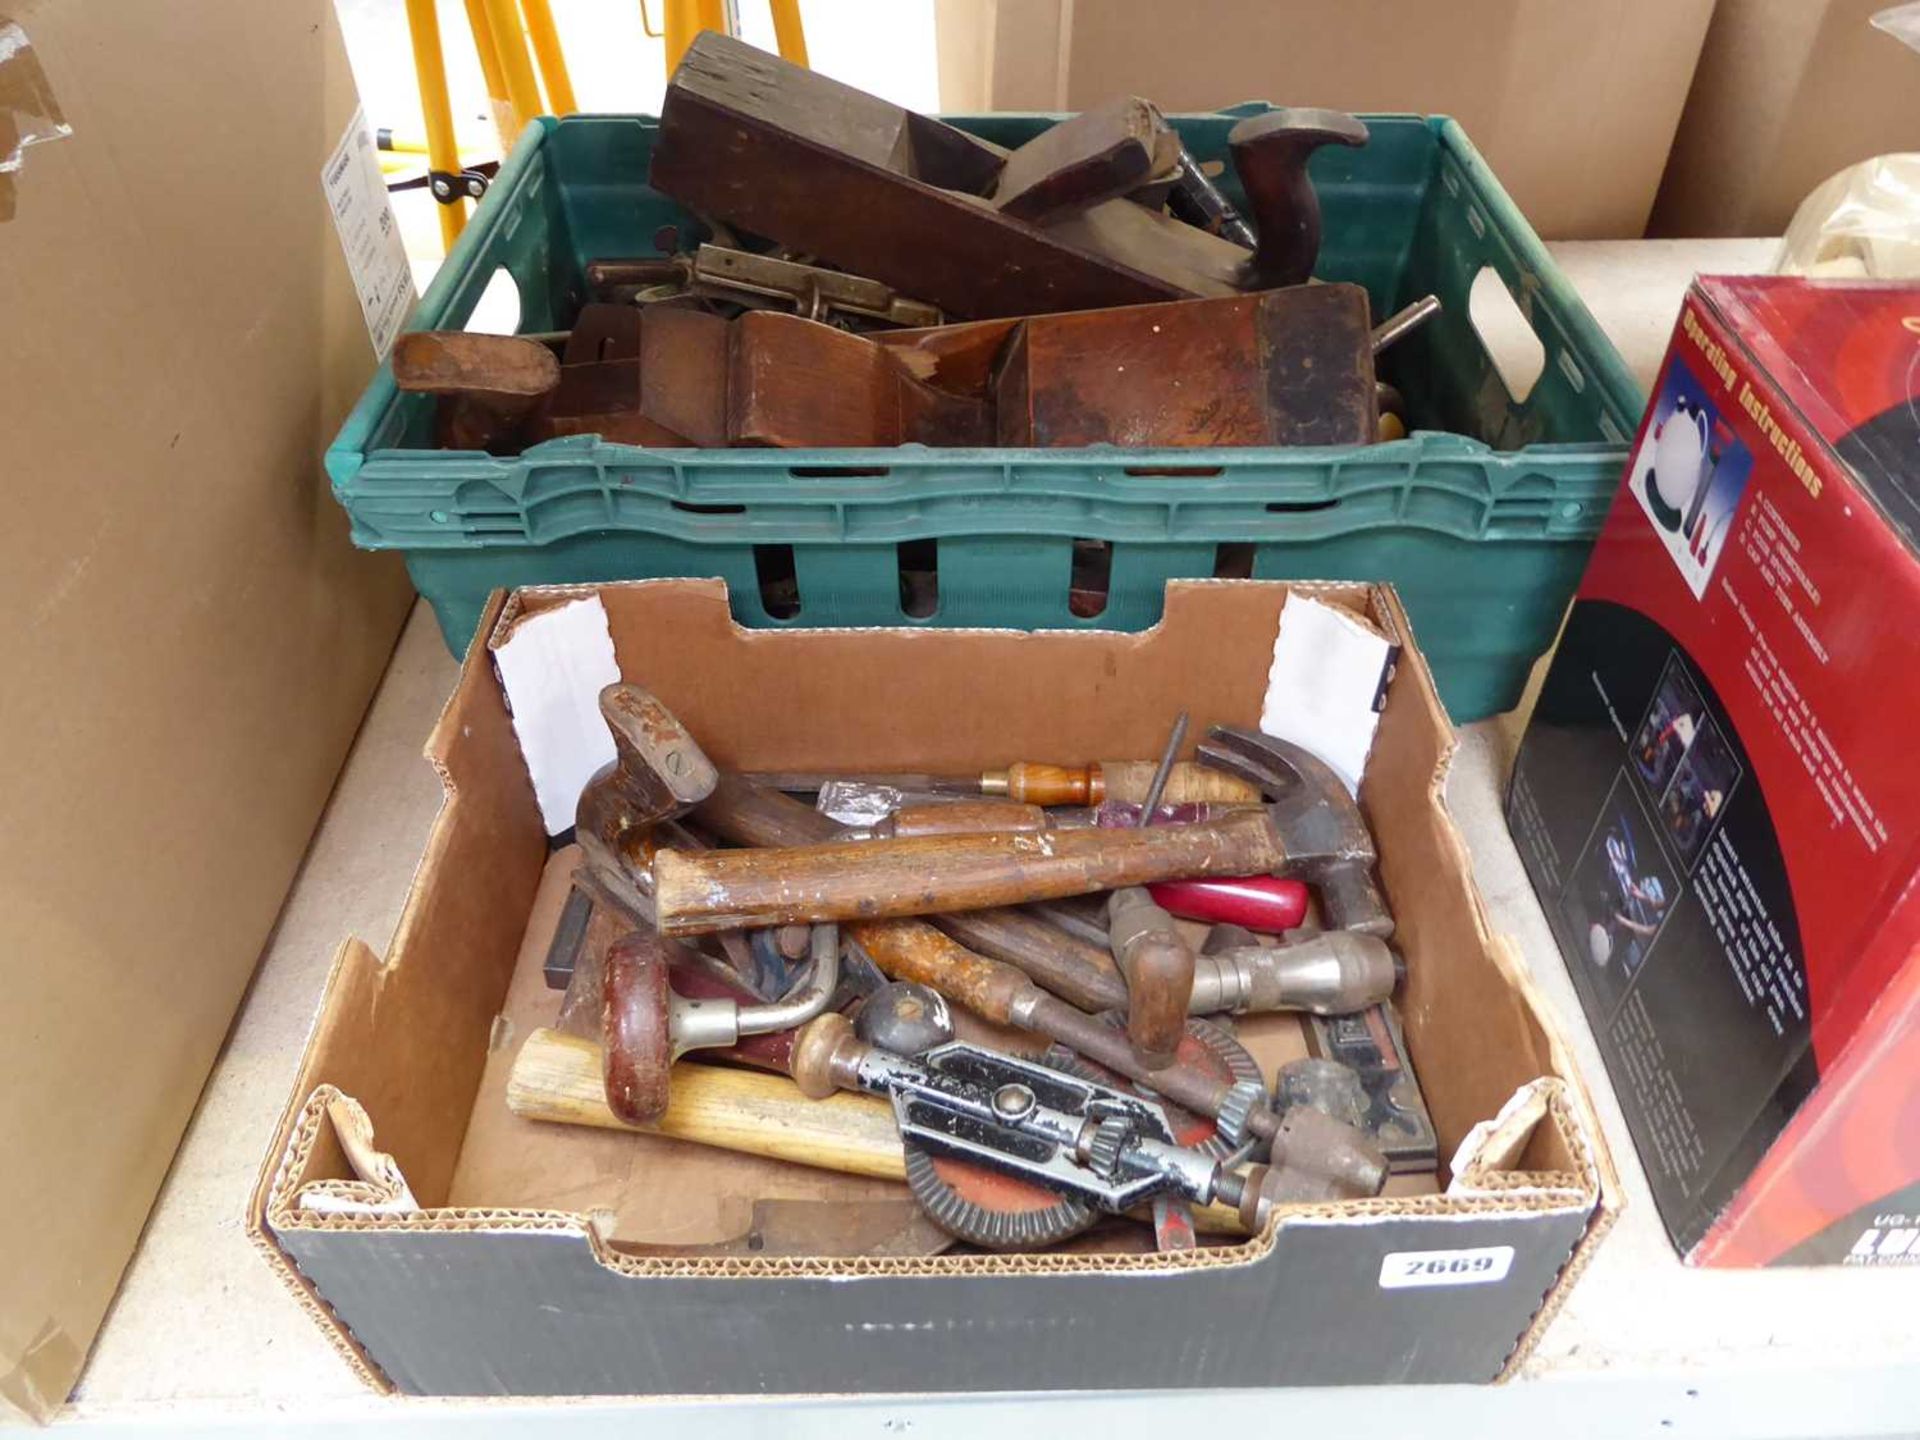 2 boxes containing wood working tools incl. hammers, planers, etc.